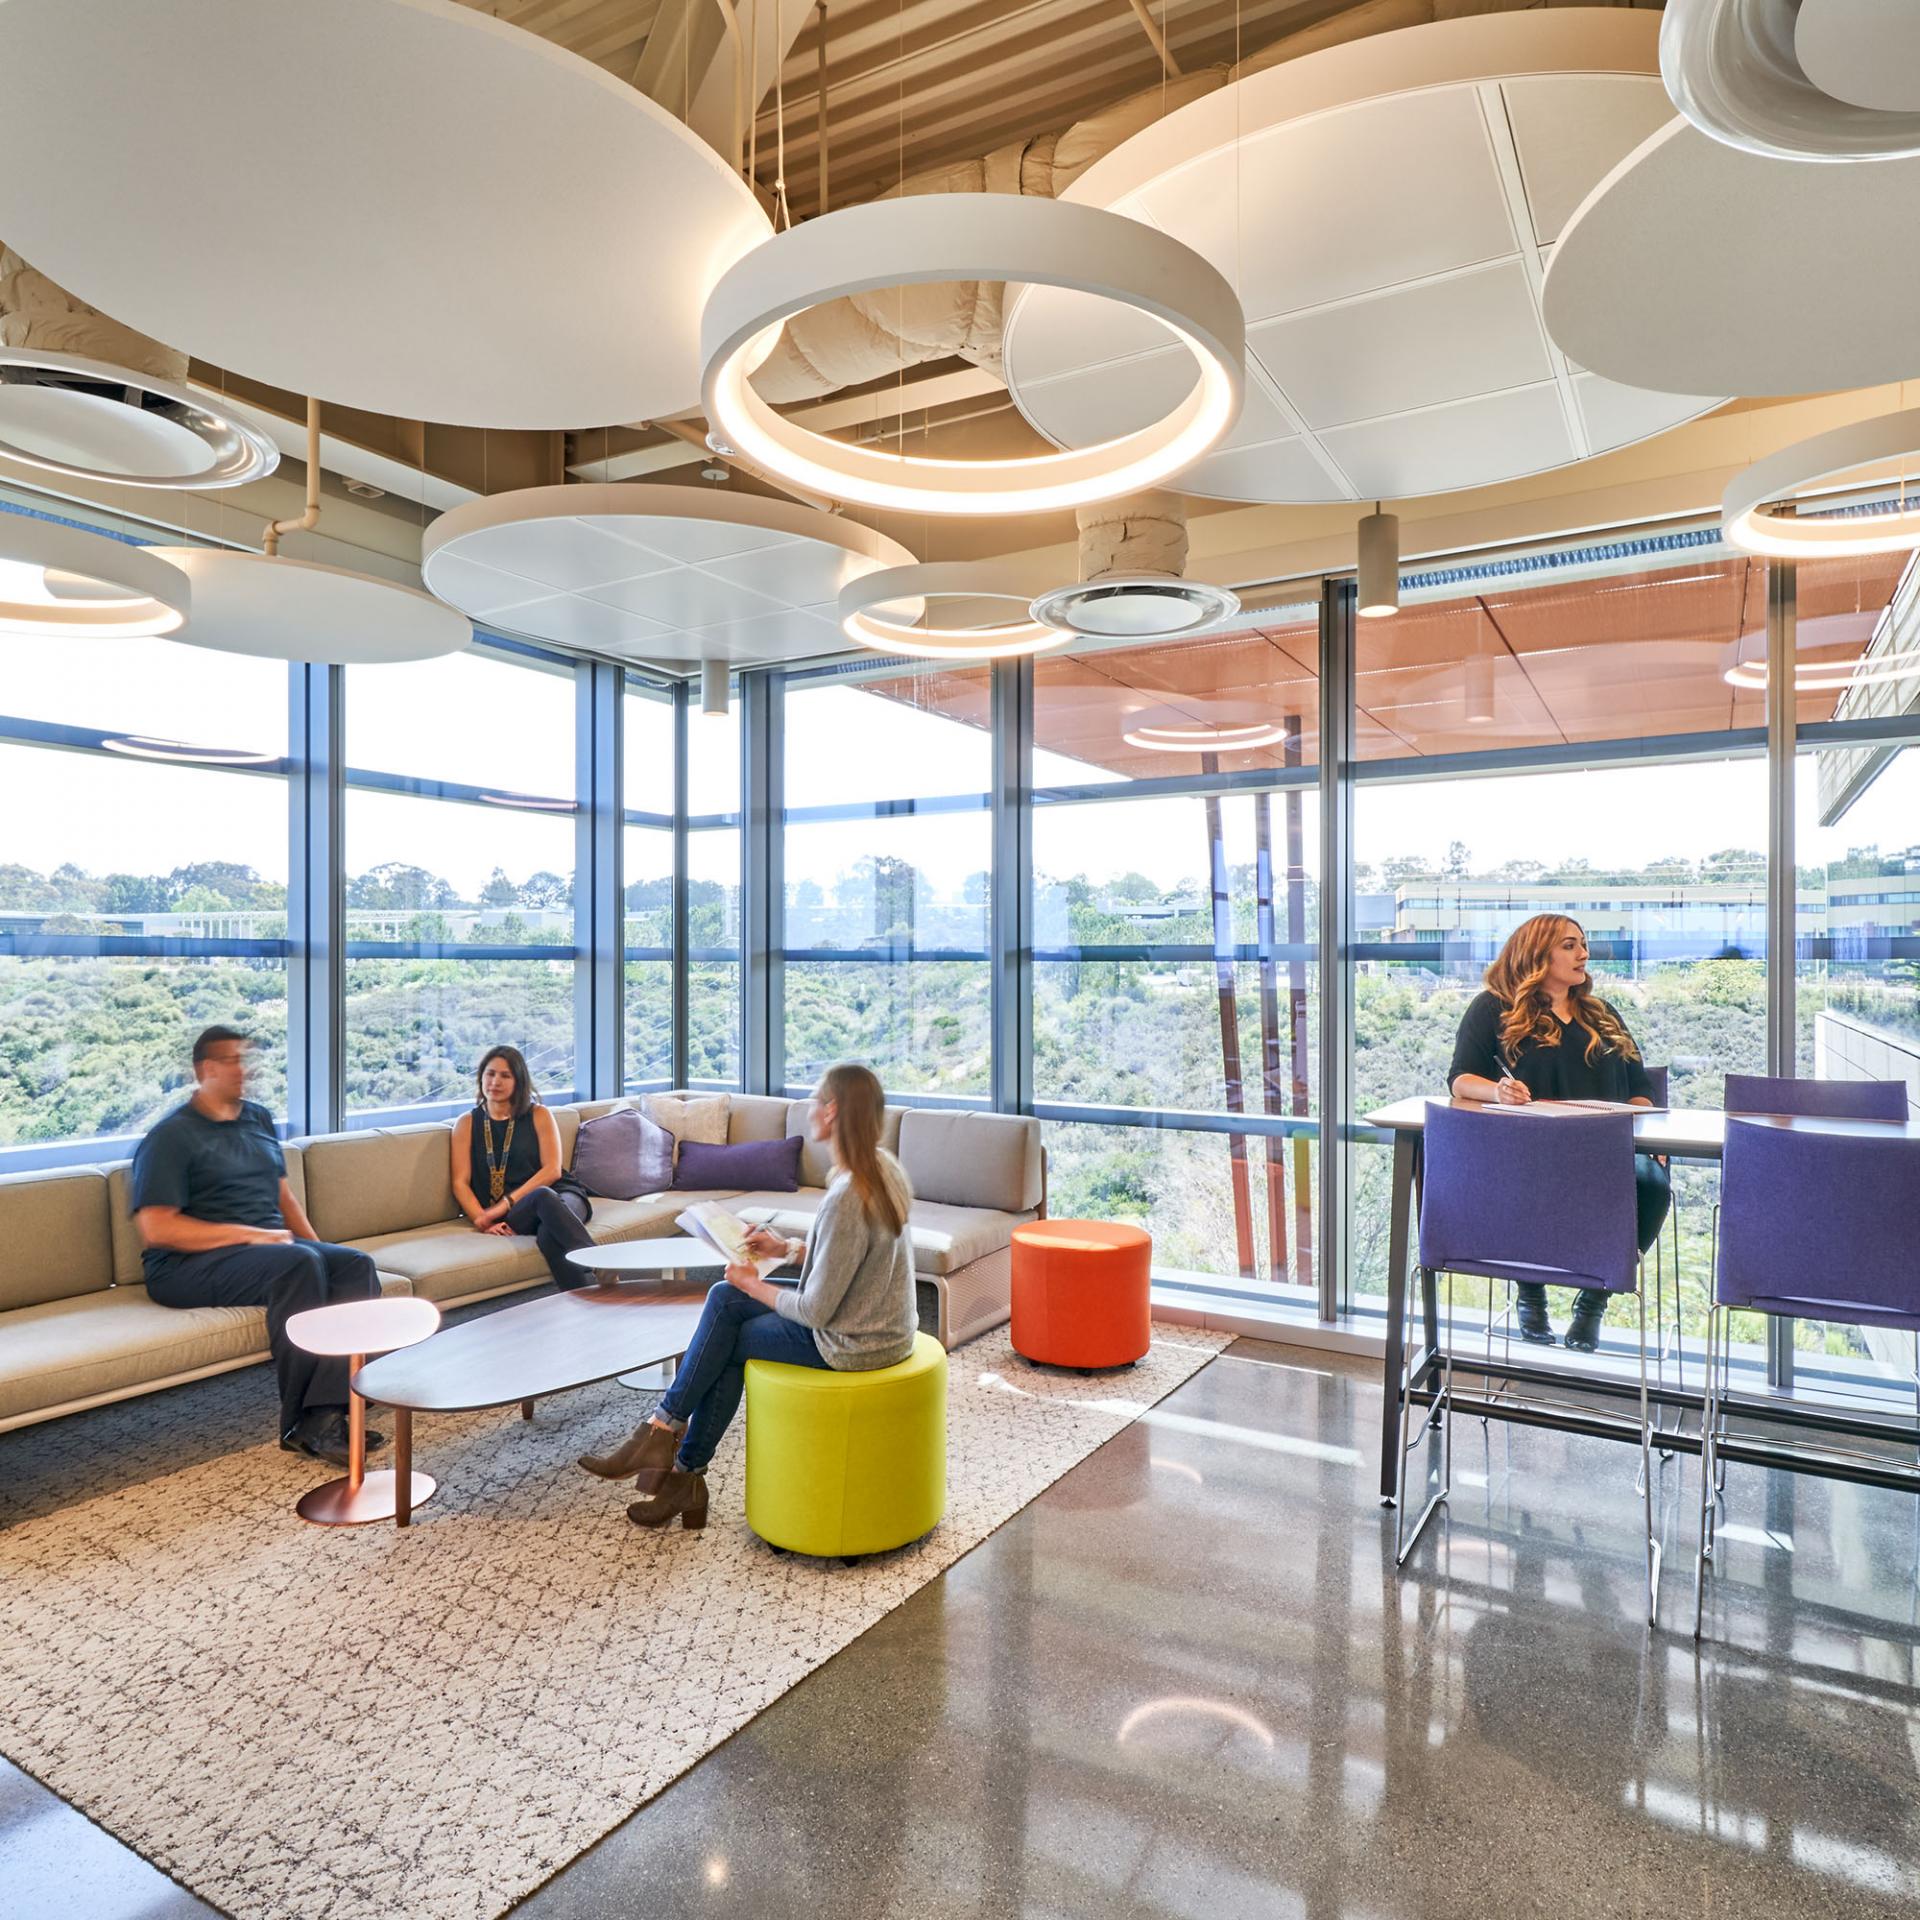 Employees taking a break at the San Diego Vertex Pharmaceuticals research facility